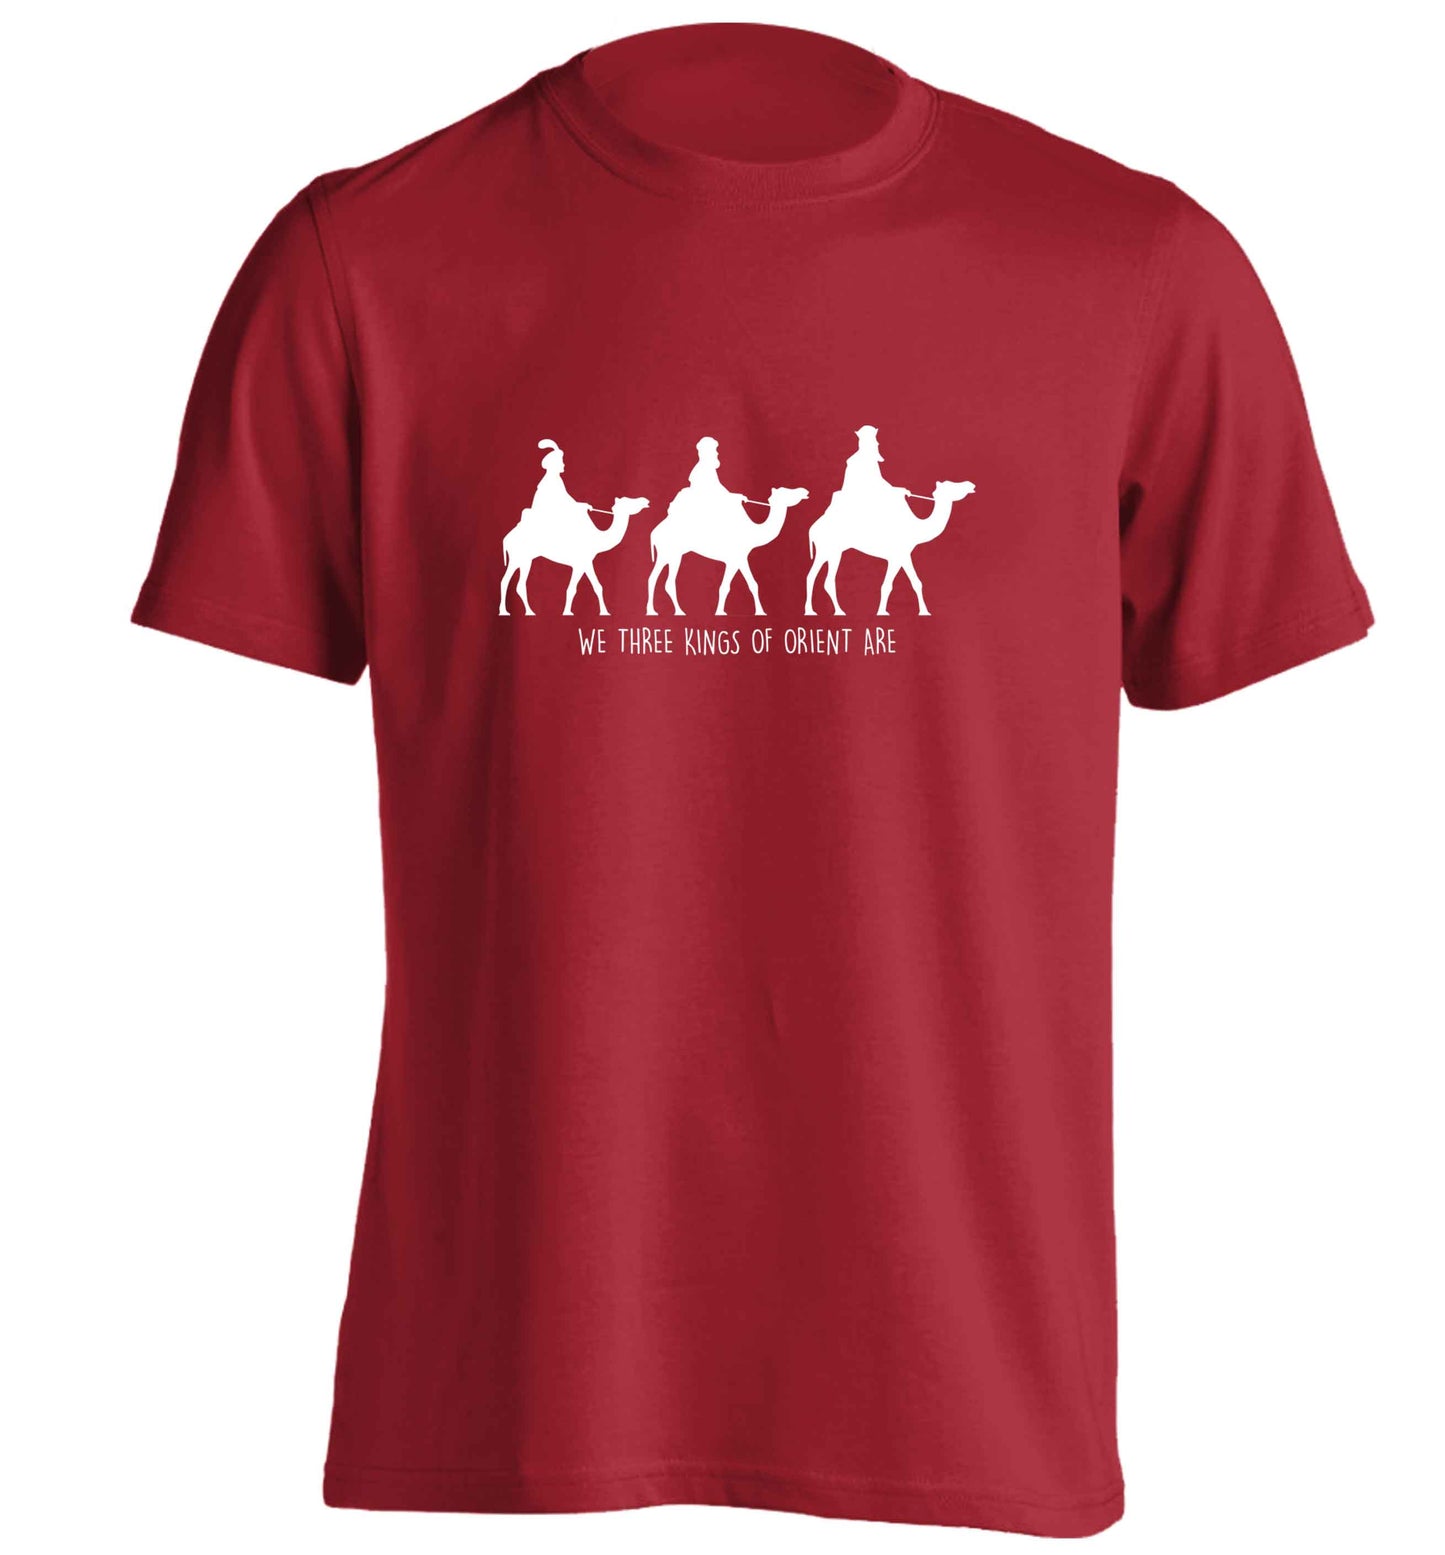 We three kings of orient are adults unisex red Tshirt 2XL